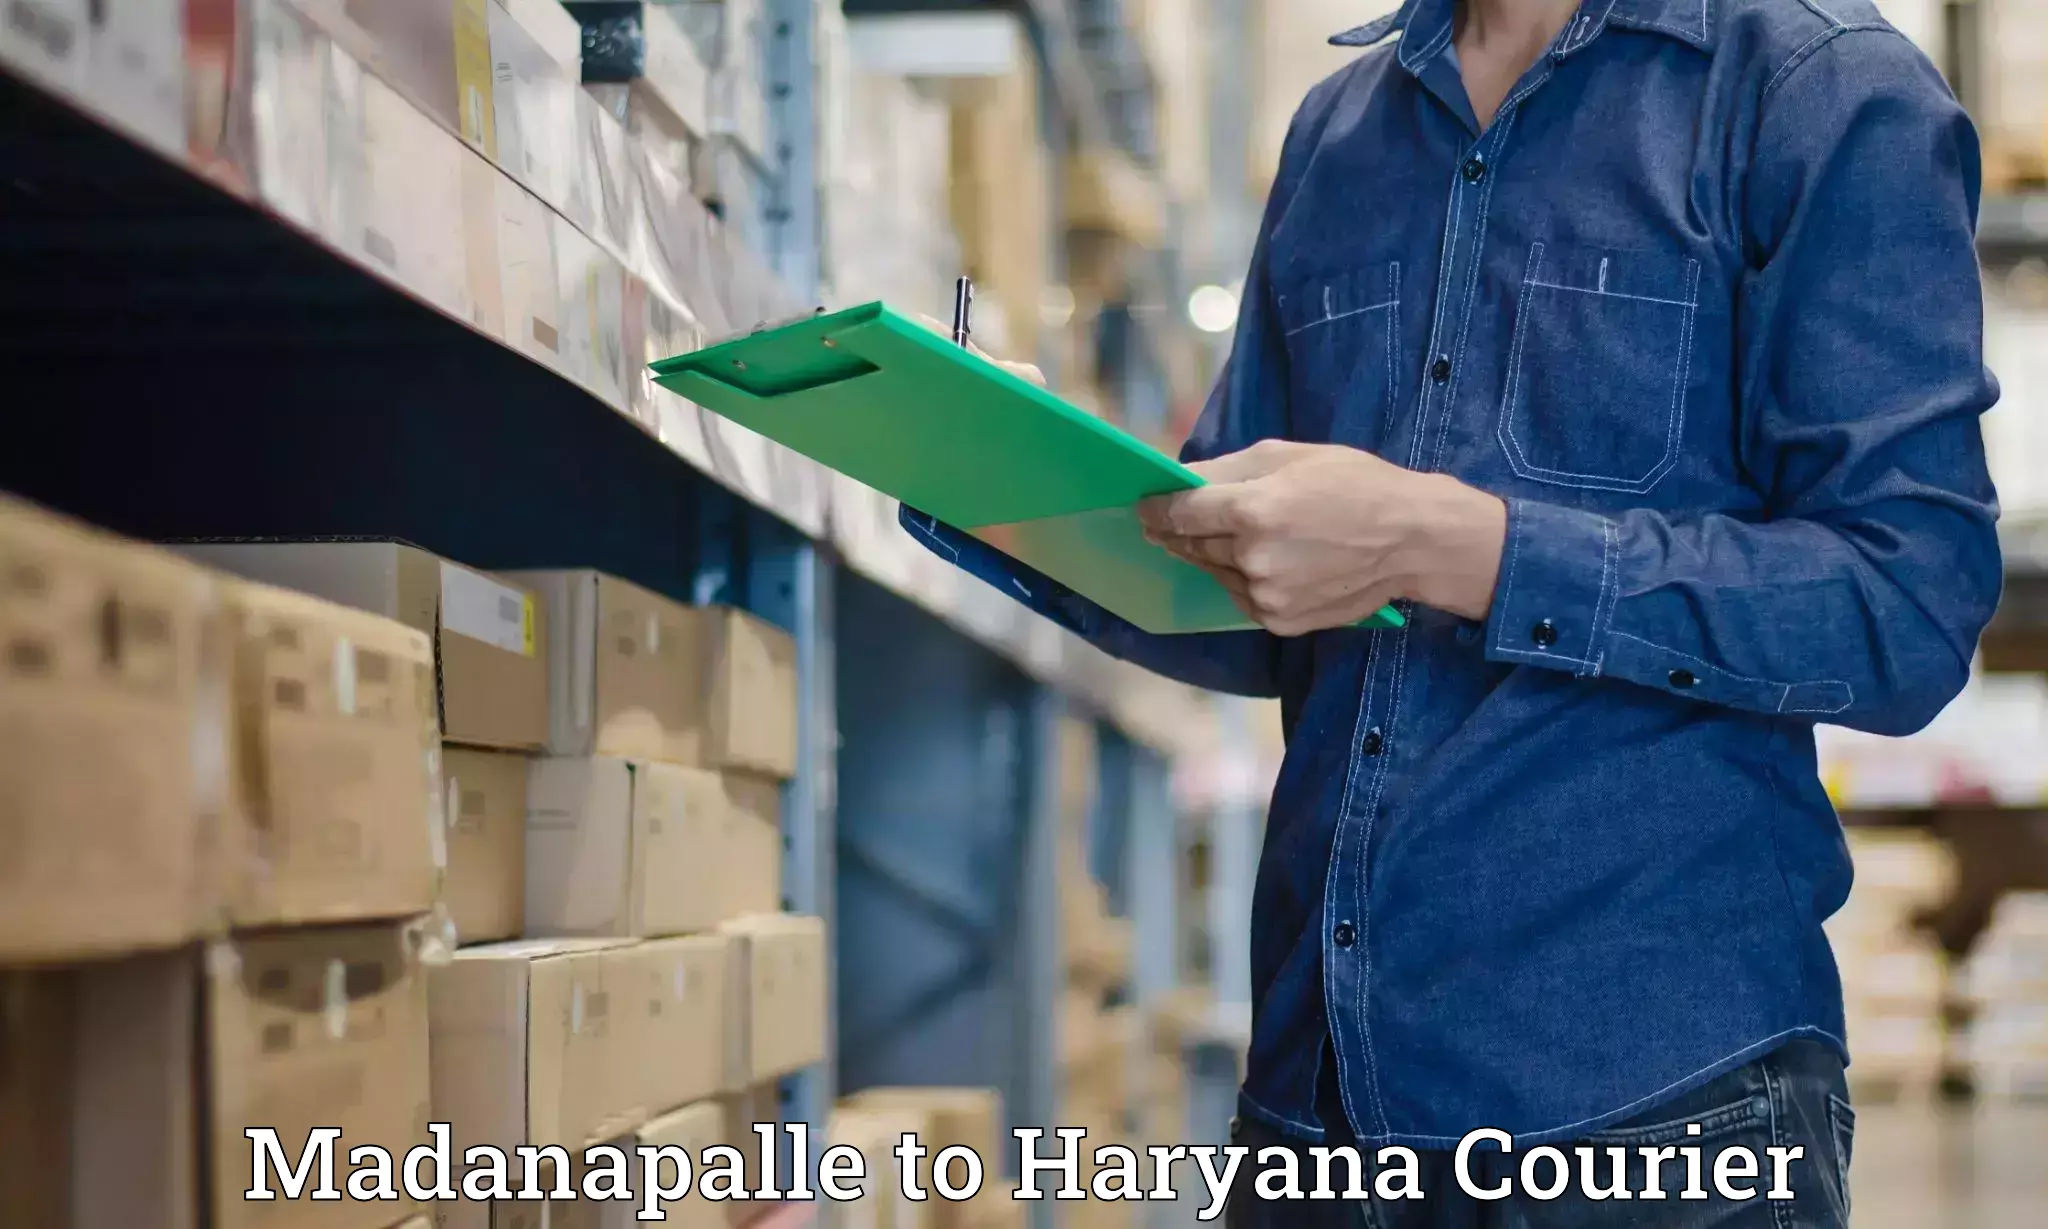 Professional courier handling in Madanapalle to Chirya